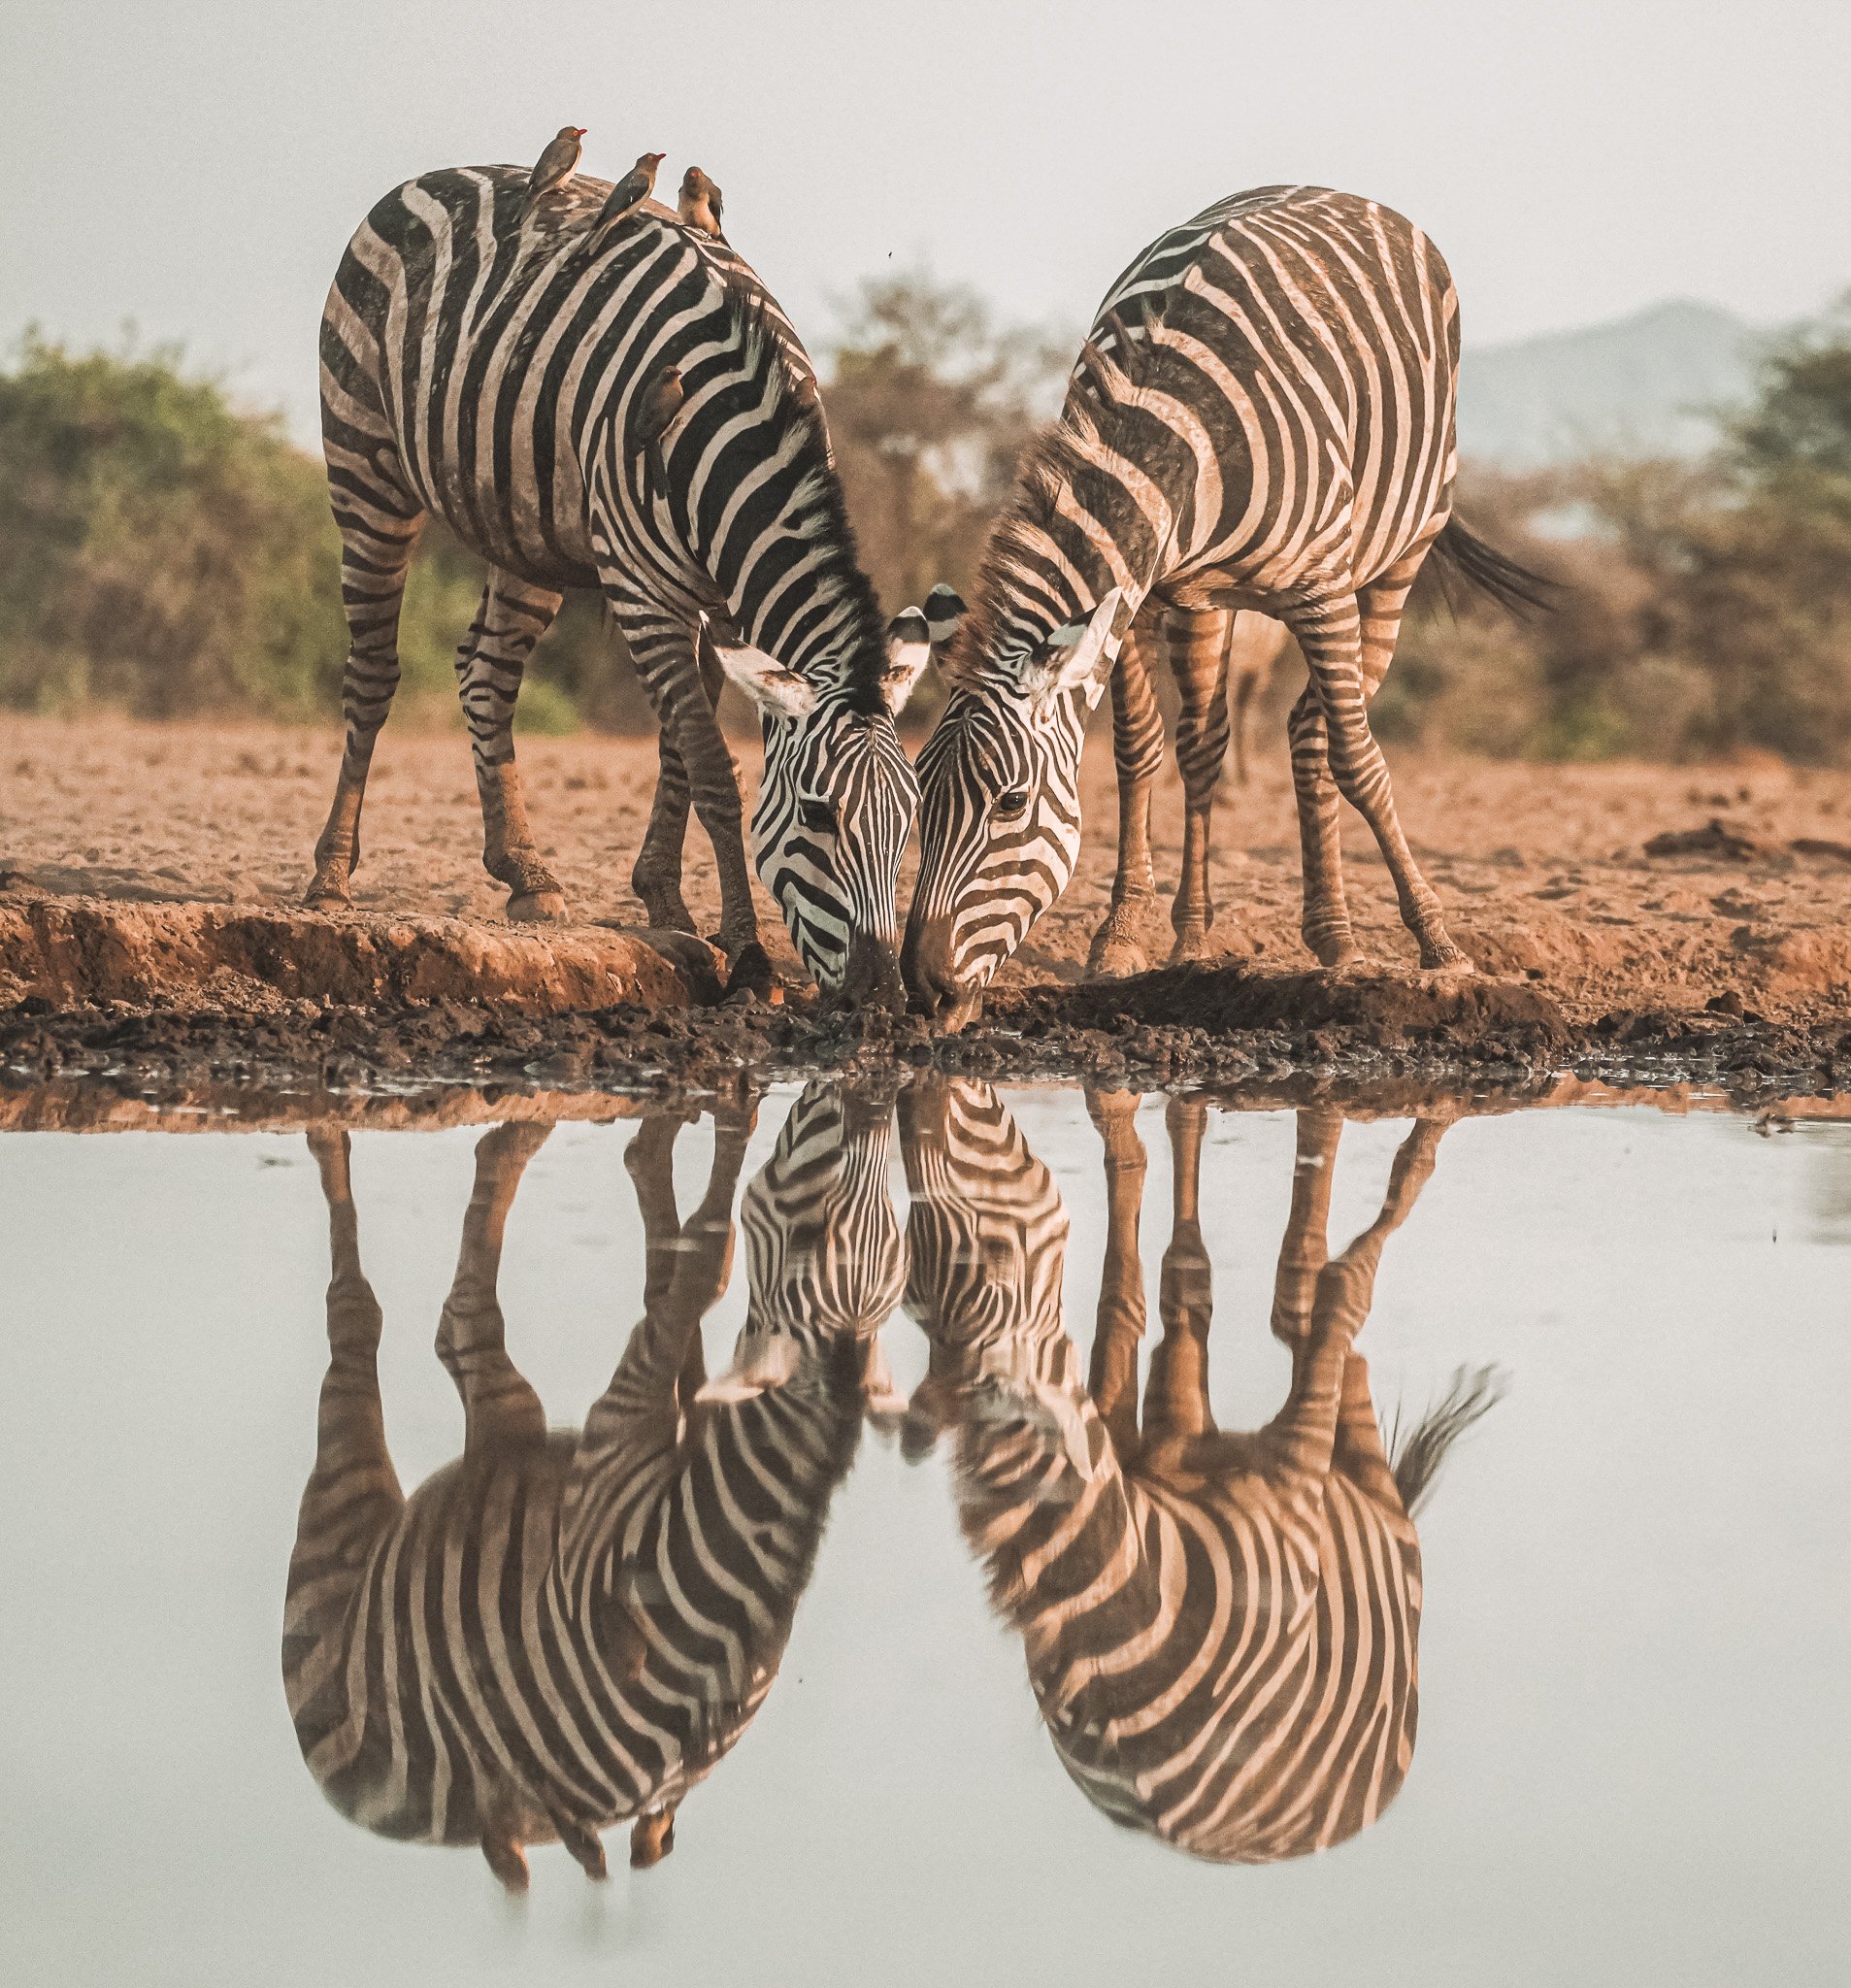 Sundown at @shompolehide. 
Such a serene and magical spot to enjoy the wildlife in peace and tranquillity of the evening light while staying at @shompole_wilderness . 🦓🌅

#zebra #sunset #africansunset #zebradrinking #shompolewilderness #shompolehid